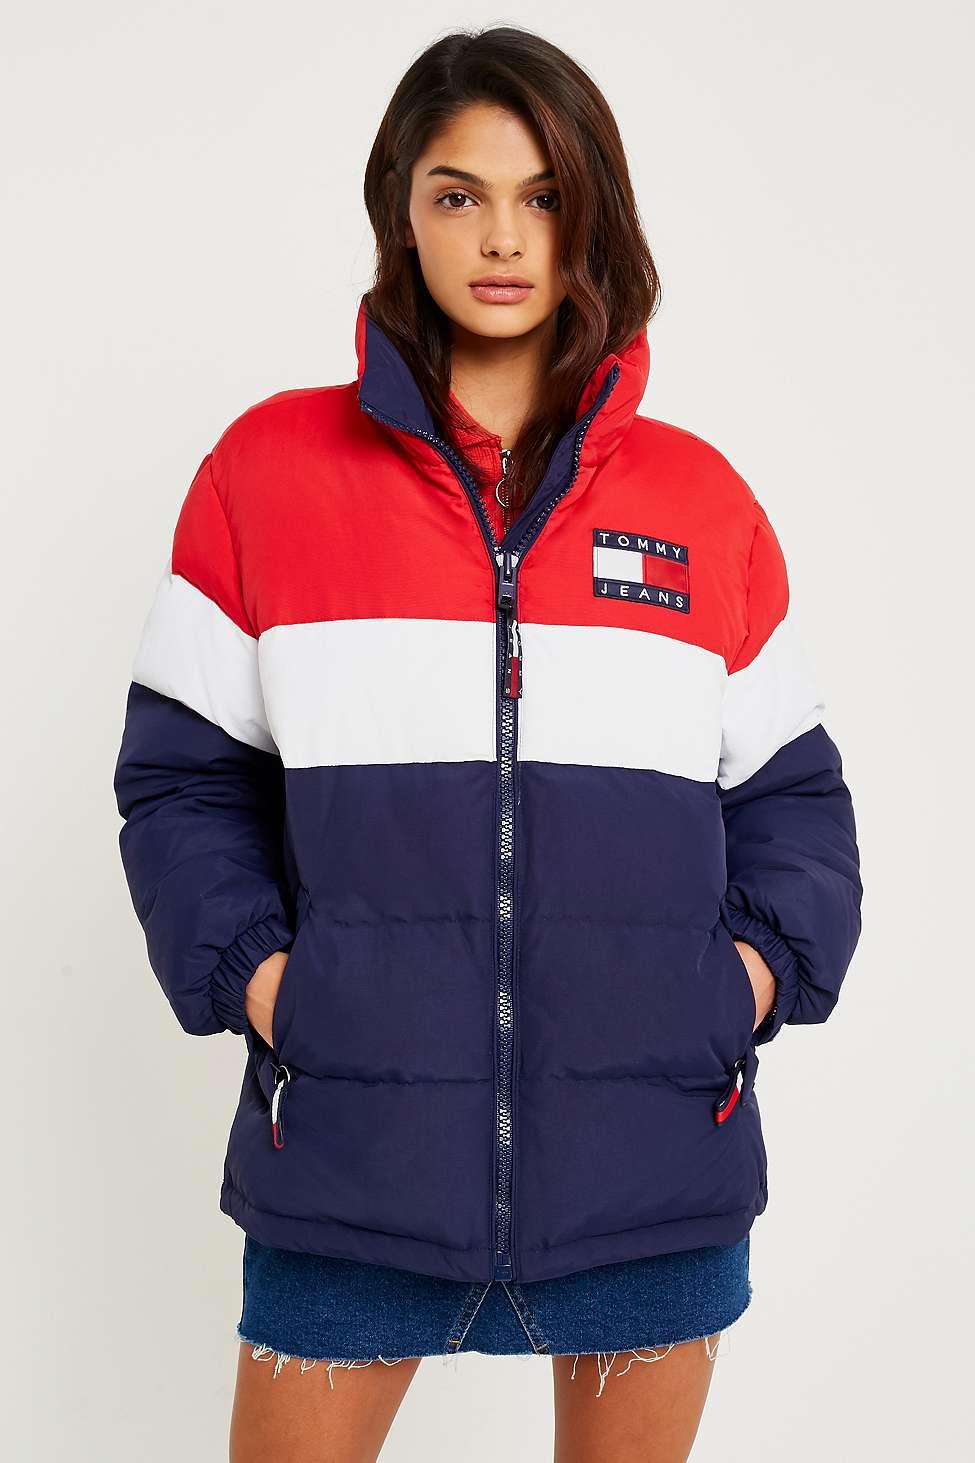 Tommy Hilfiger '90s Red White And Blue Puffer Jacket | Lyst UK